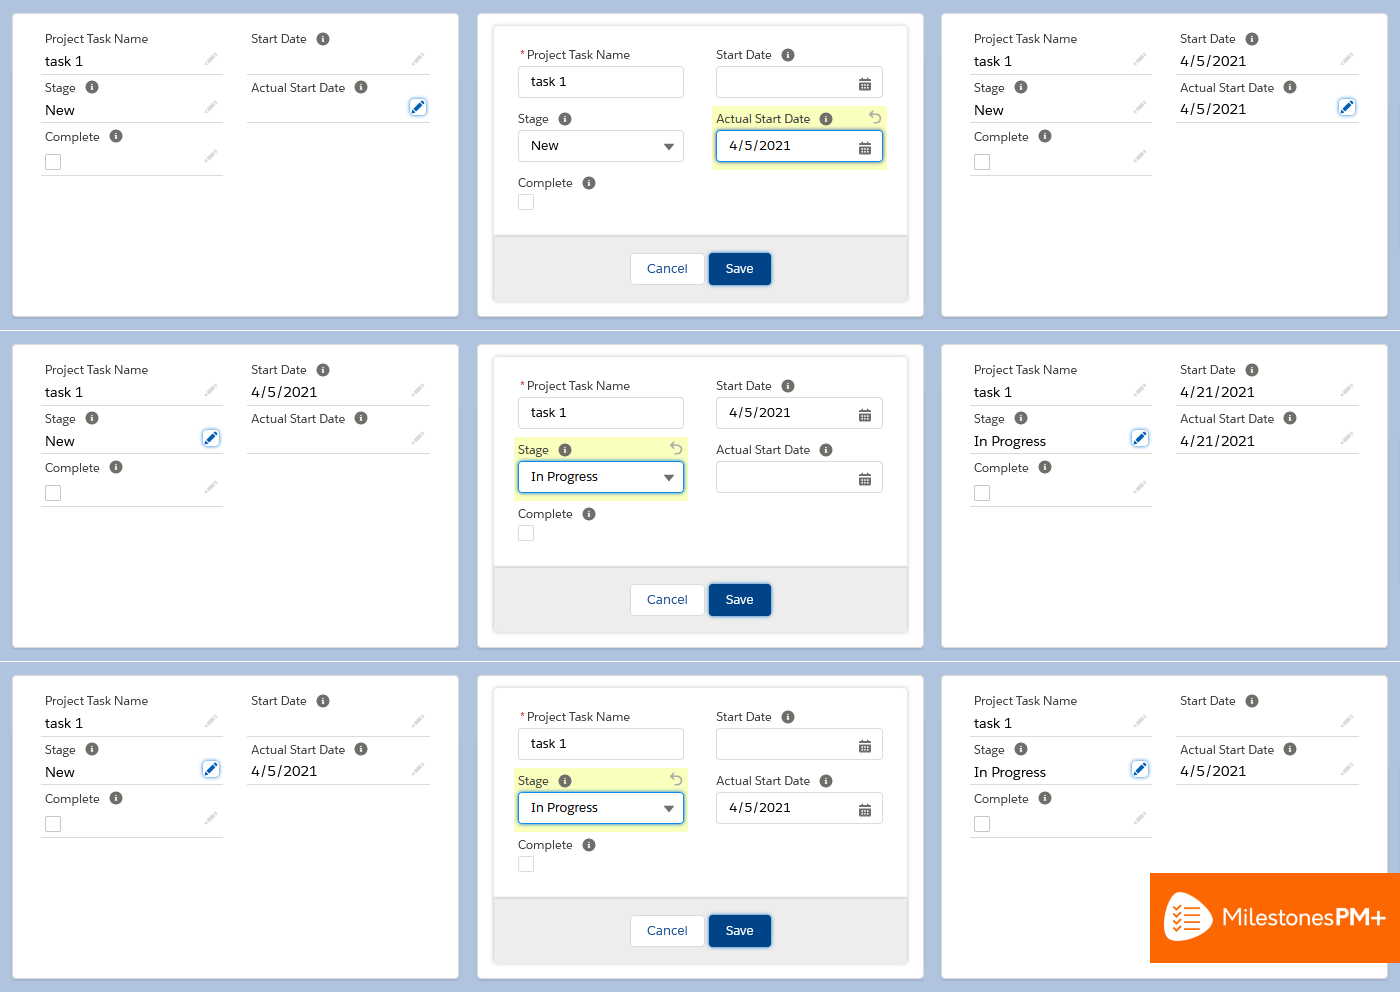 Project date shifting configuration in free Salesforce task management app Milestones PM+